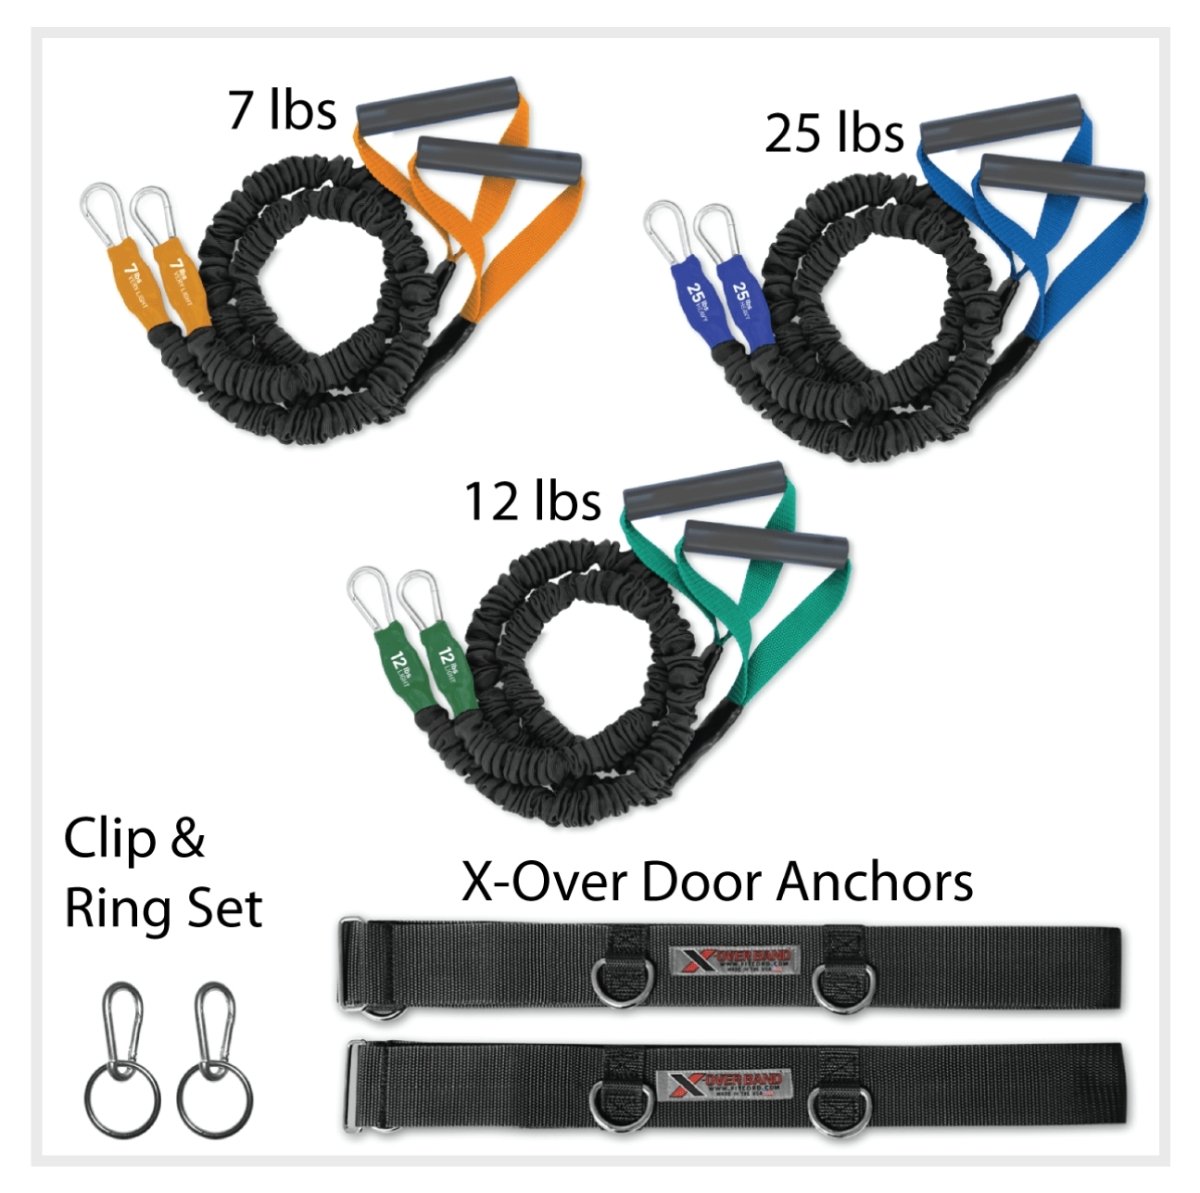 American made crossfit shoulder and arm resistance bands. Better than crossover symmetry and last longer with adjustable door anchors